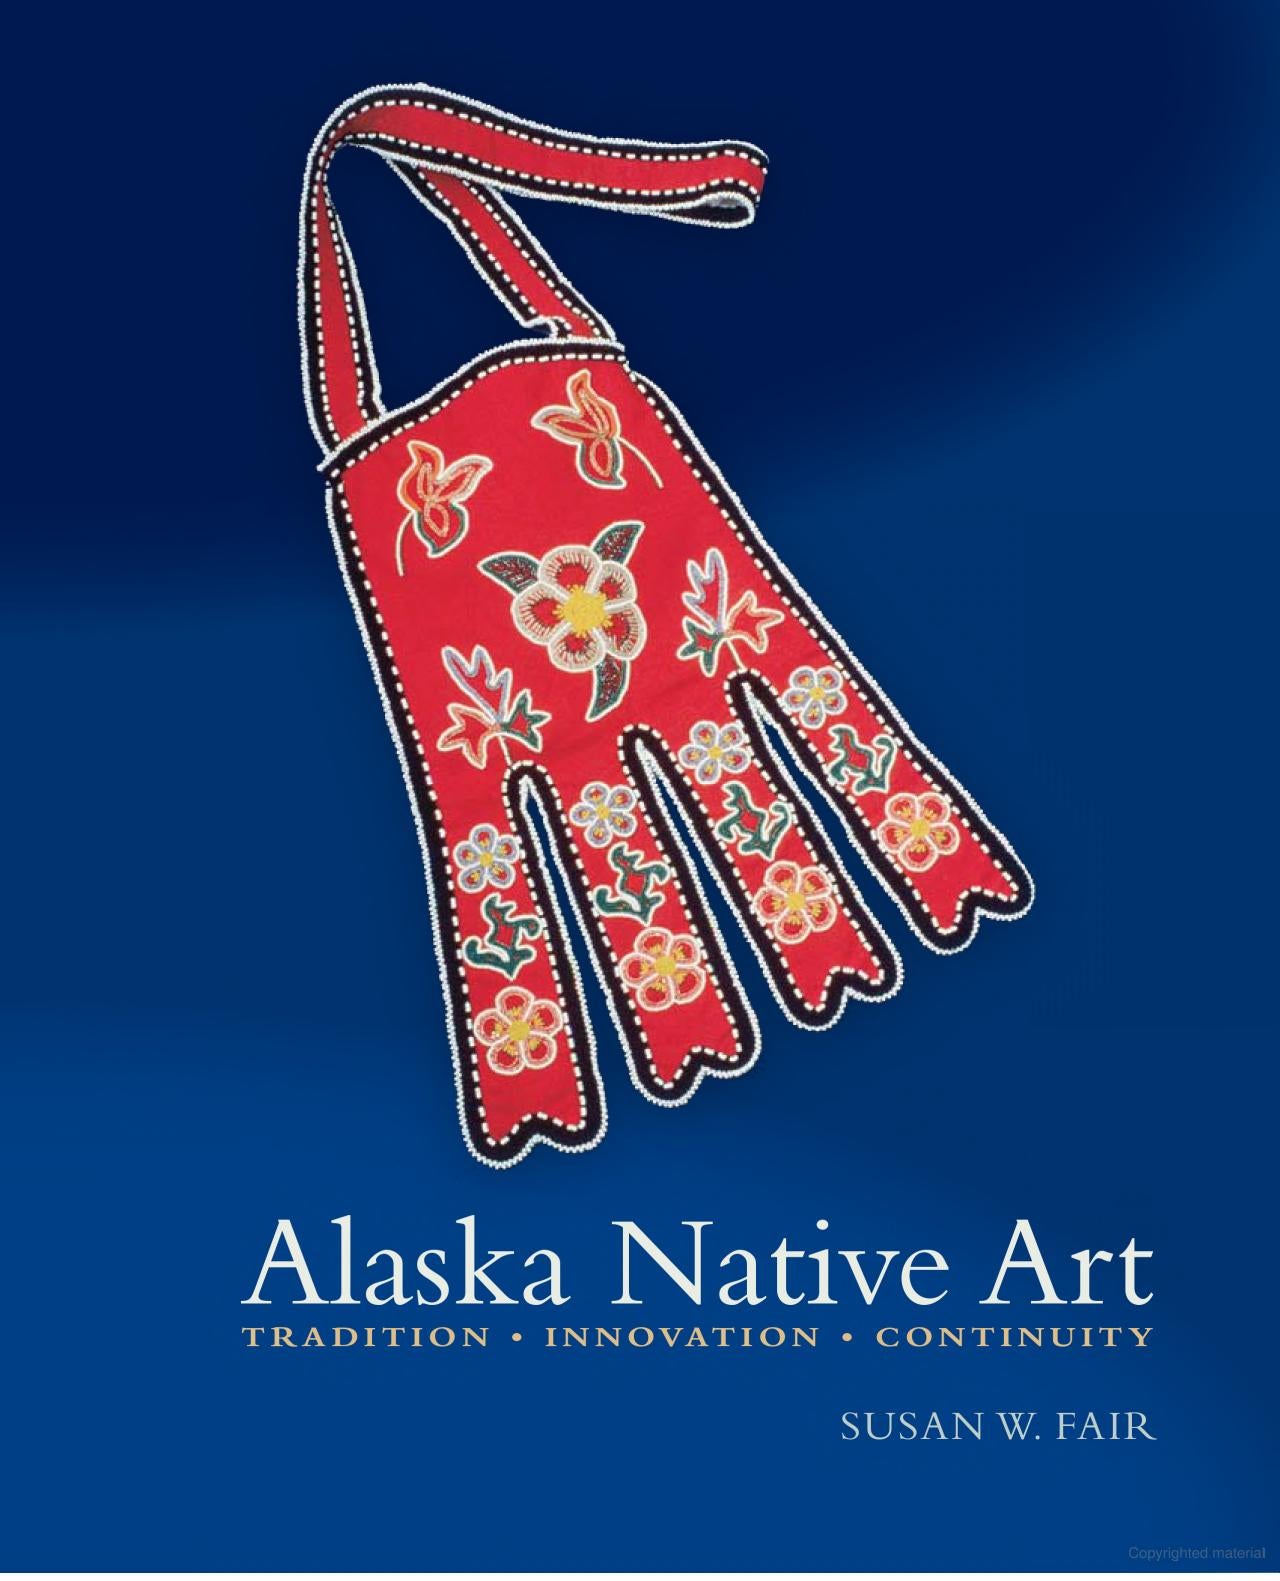 Alaska Native Art: Tradition, Innovation, Continuity by Susan W. Fair - Softcover